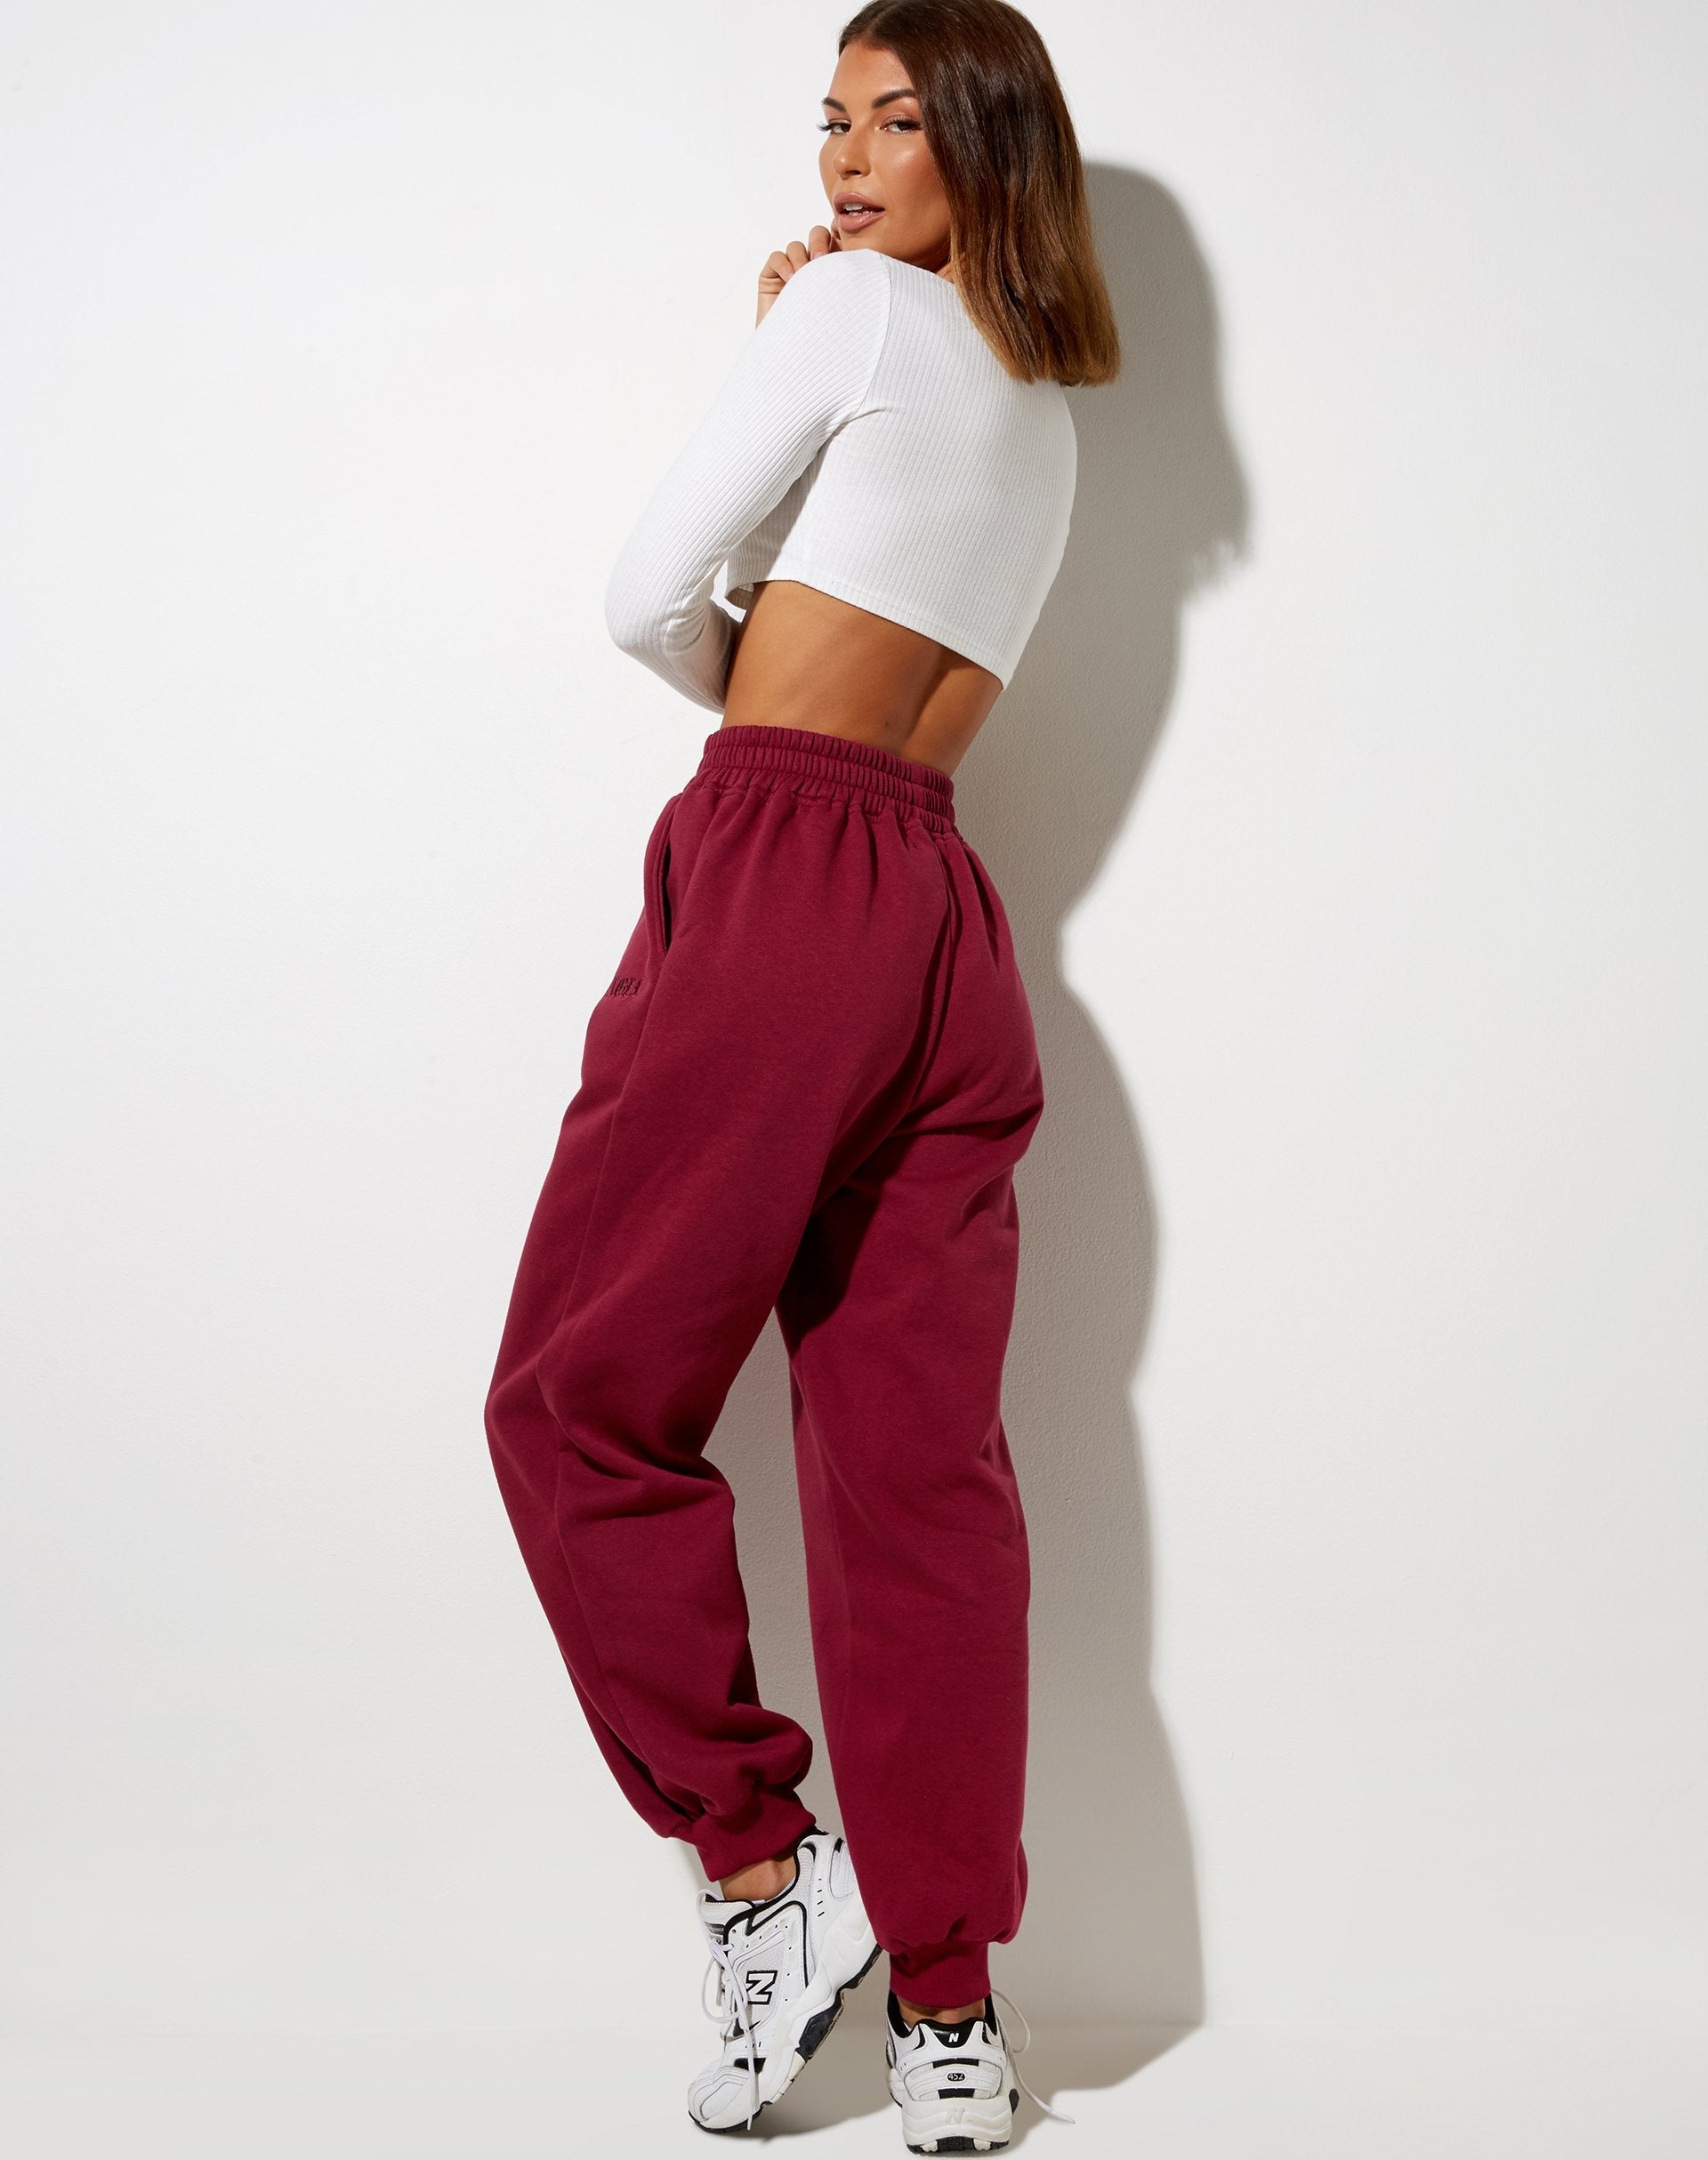 Roider Jogger in Burgundy 'Angel' Embro